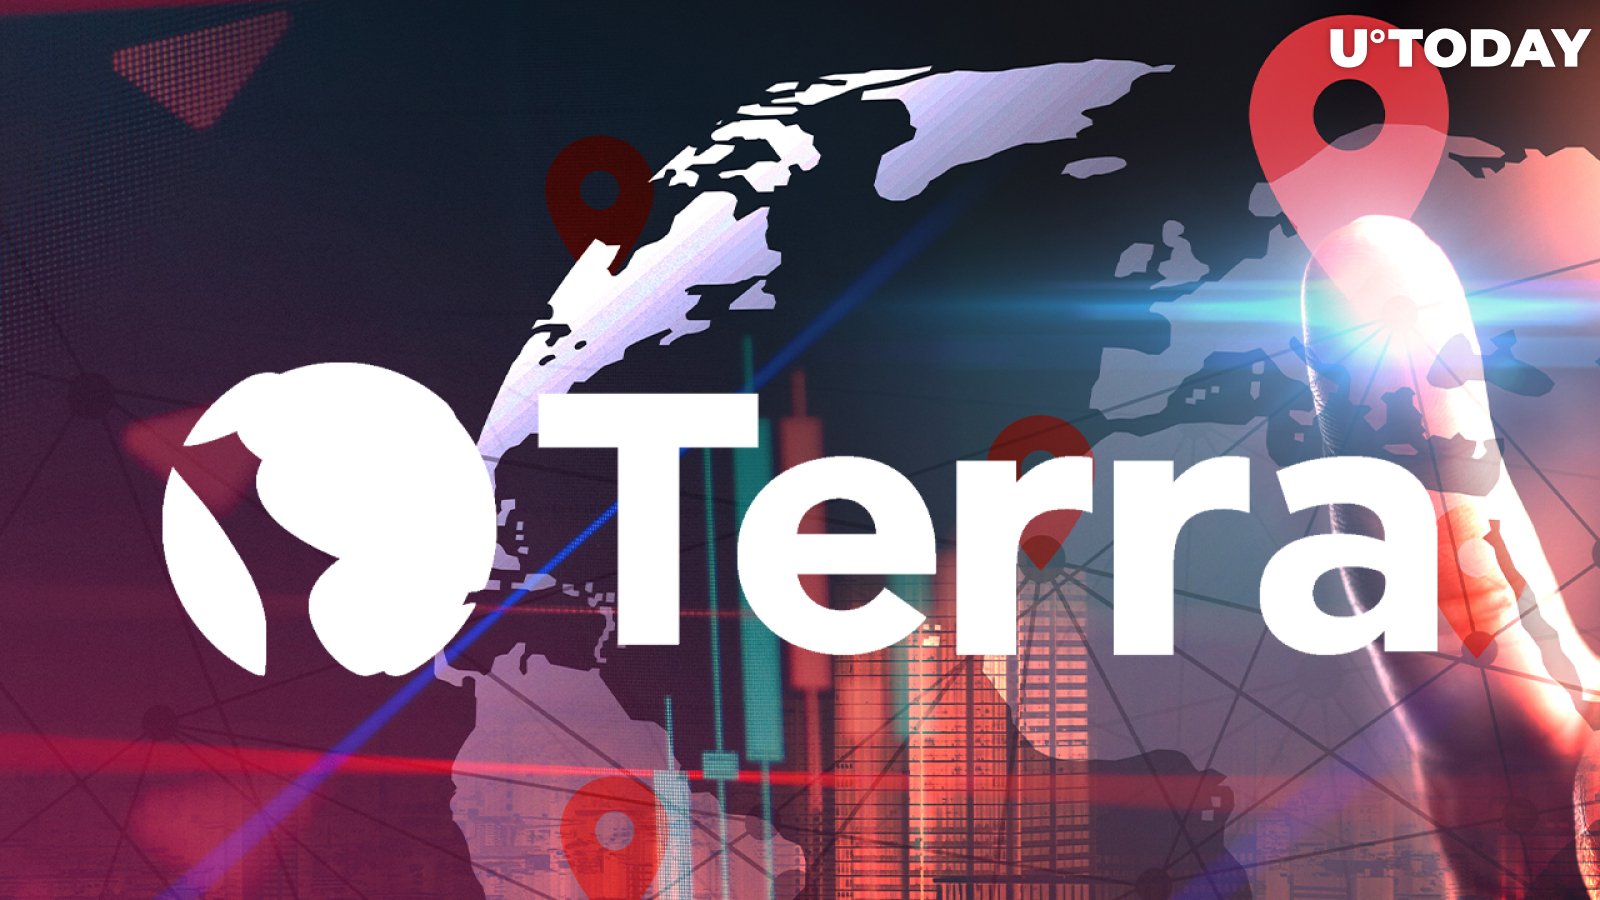 TerraUSD (UST) Collapse Could Be Orchestrated by Small Group of Large Wallets: Report by Nansen